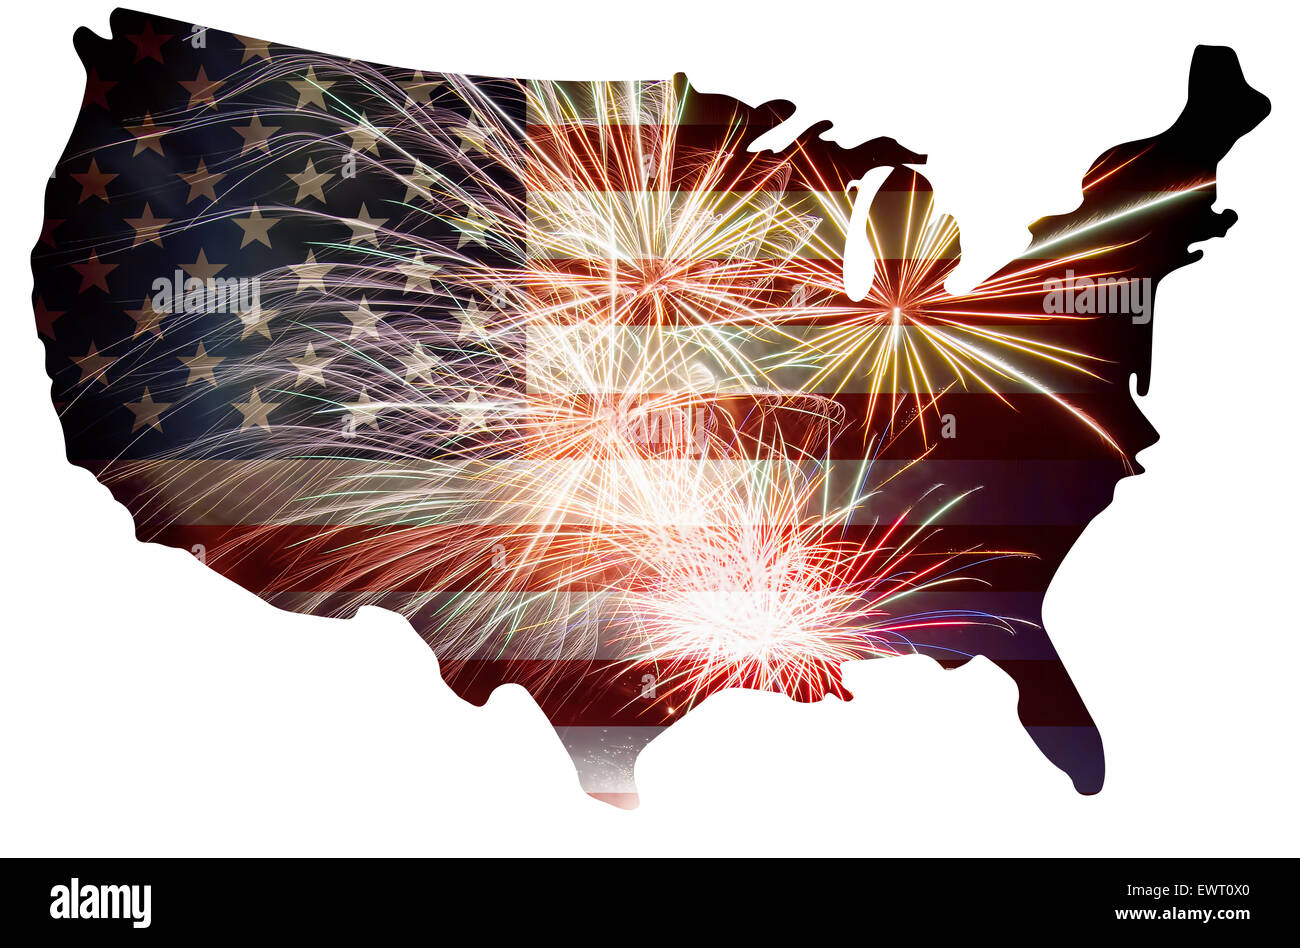 United States of America USA Flag in Map Silhouette Outline with Fireworks Background For 4th of July Illustration Stock Photo